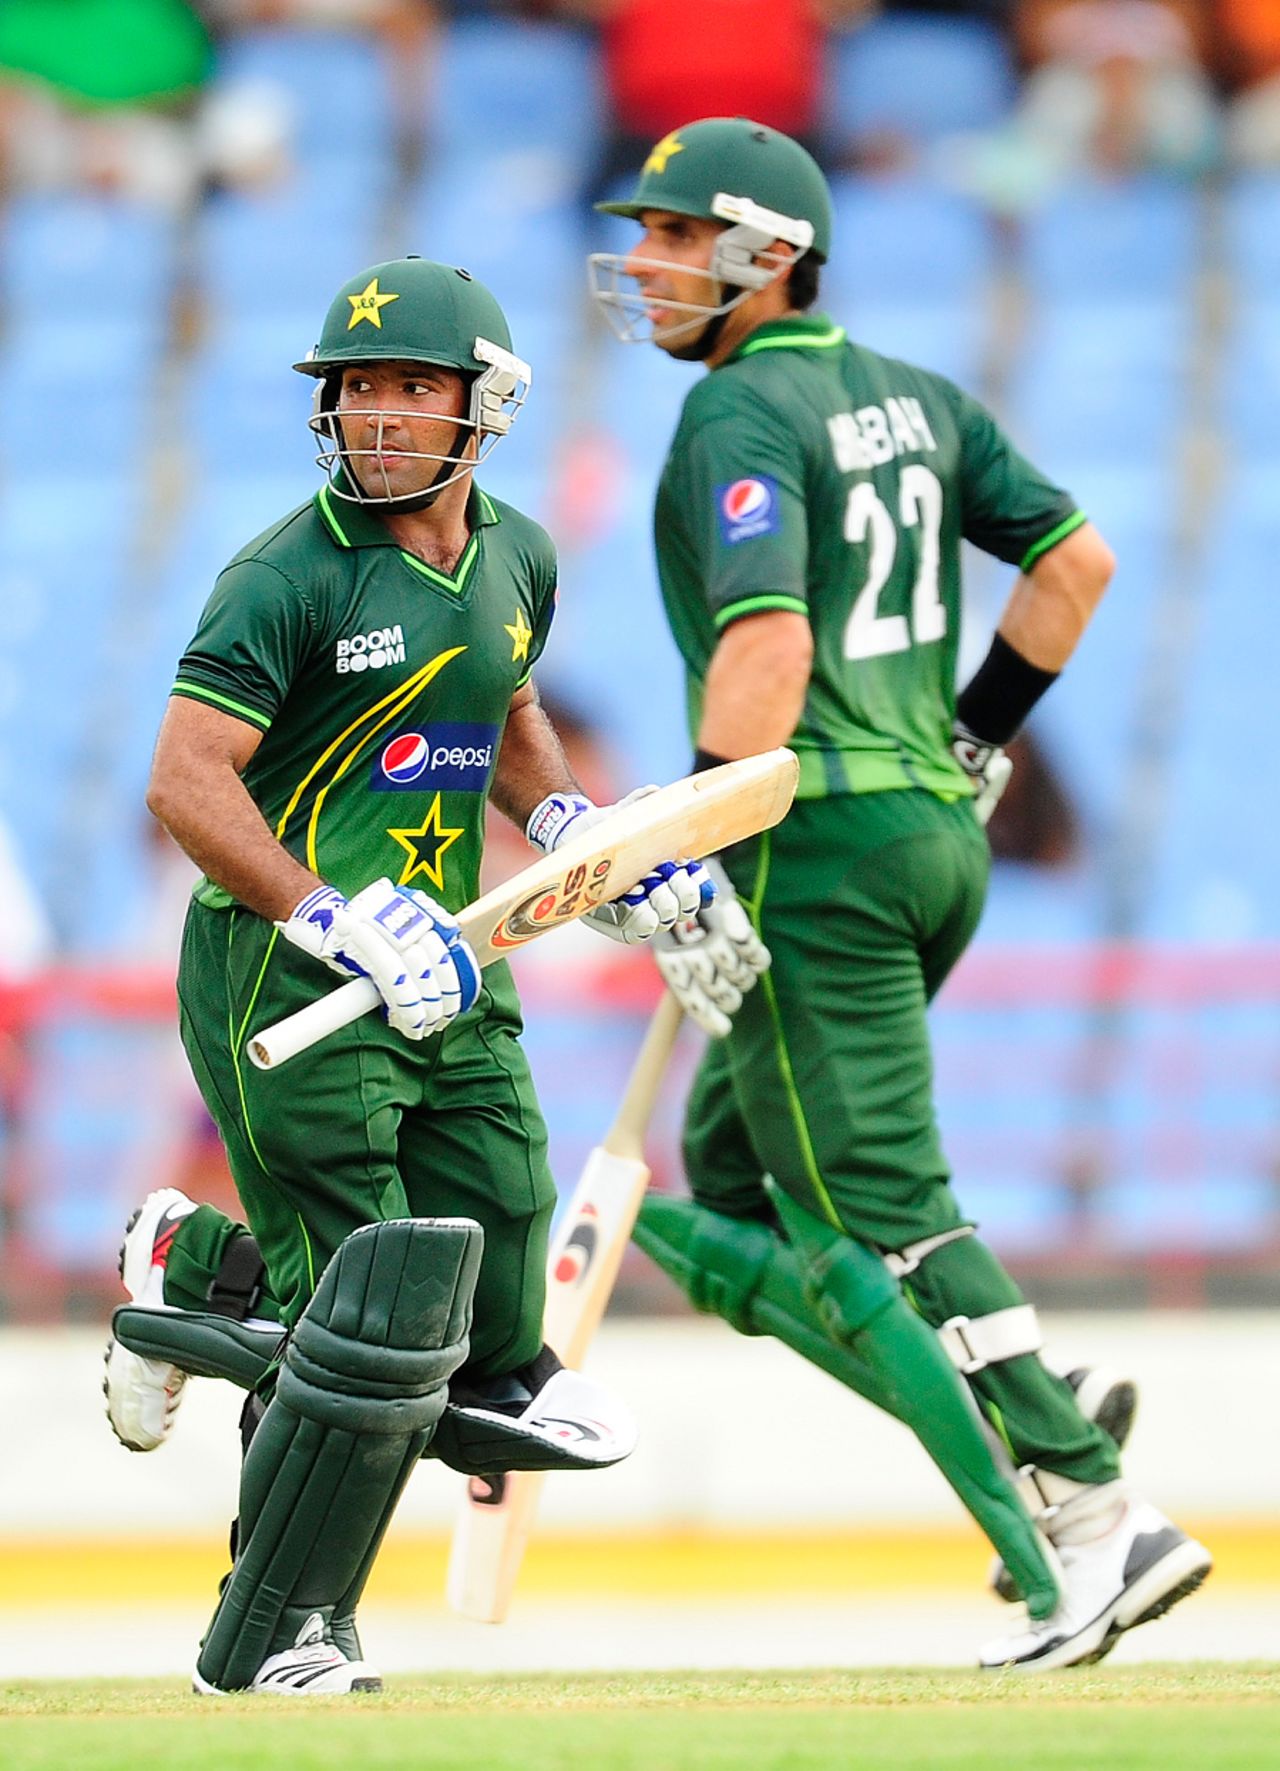 Asad Shafiq and Misbah-ul-Haq steered Pakistan to victory with a 134-run stand, West Indies v Pakistan, 1st ODI, St Lucia, April 23, 2011